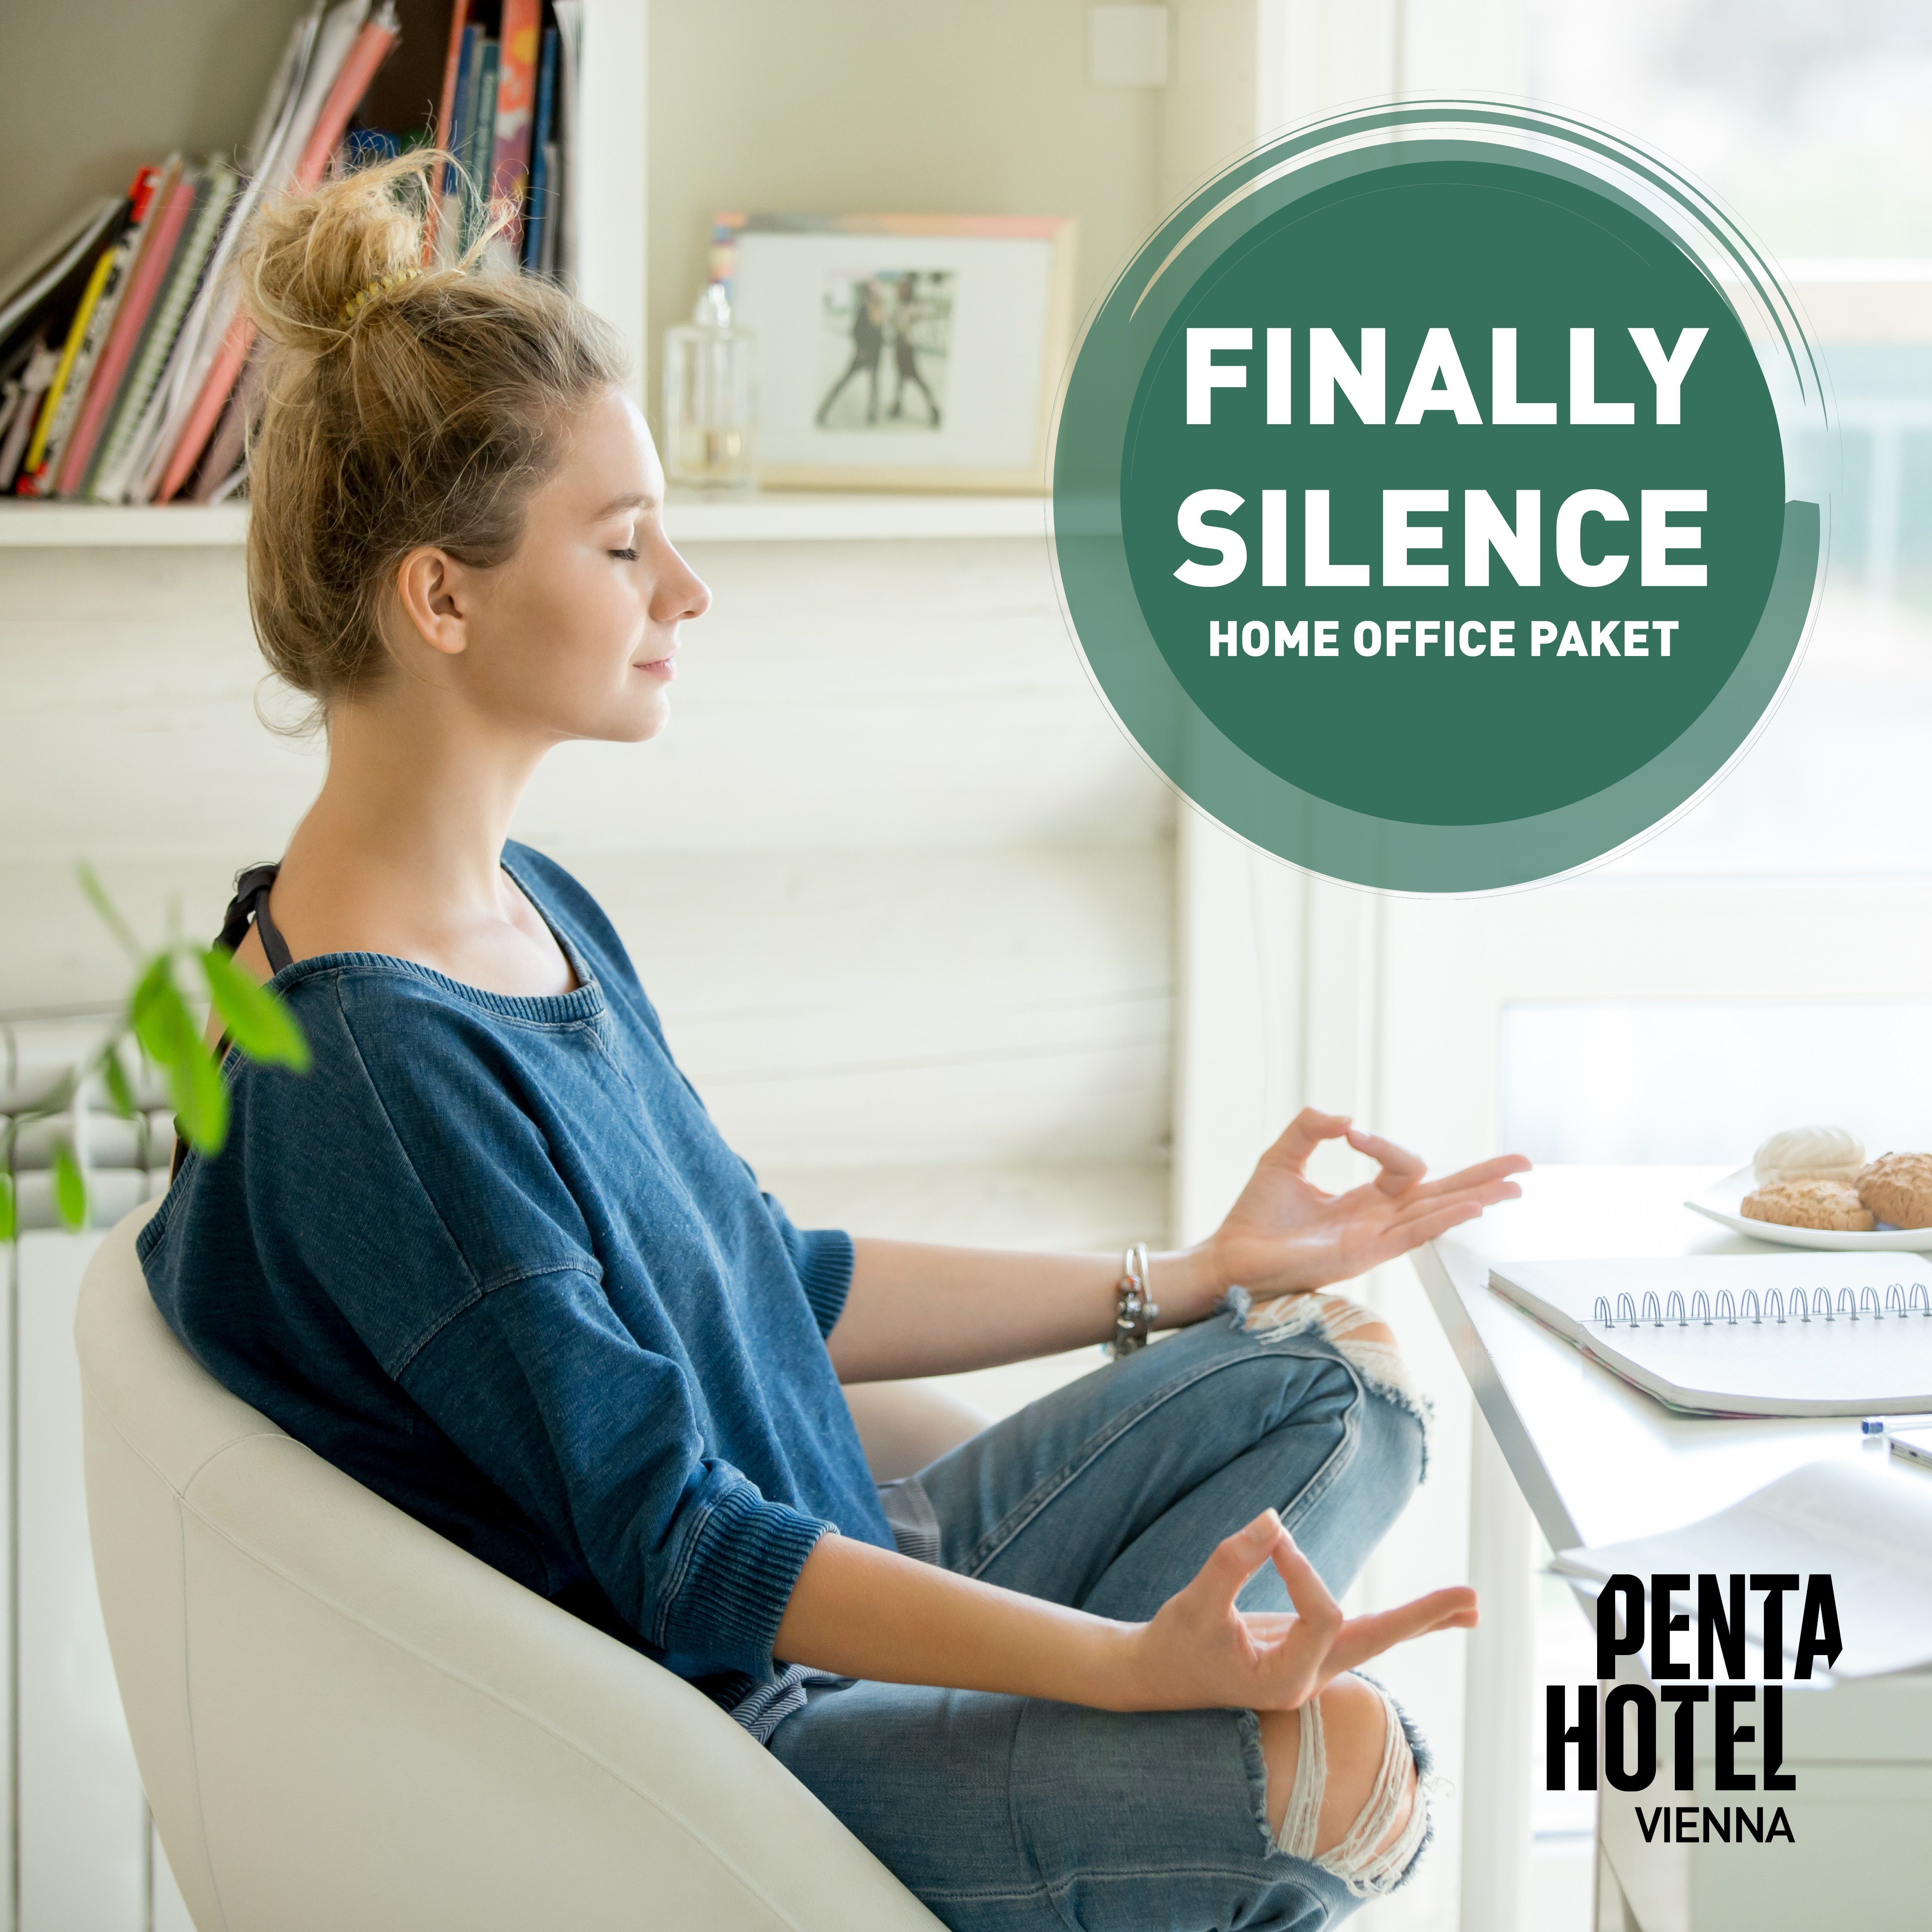 pentahotel Vienna, FINALLY SILENCE – Ready for a change of scenery?